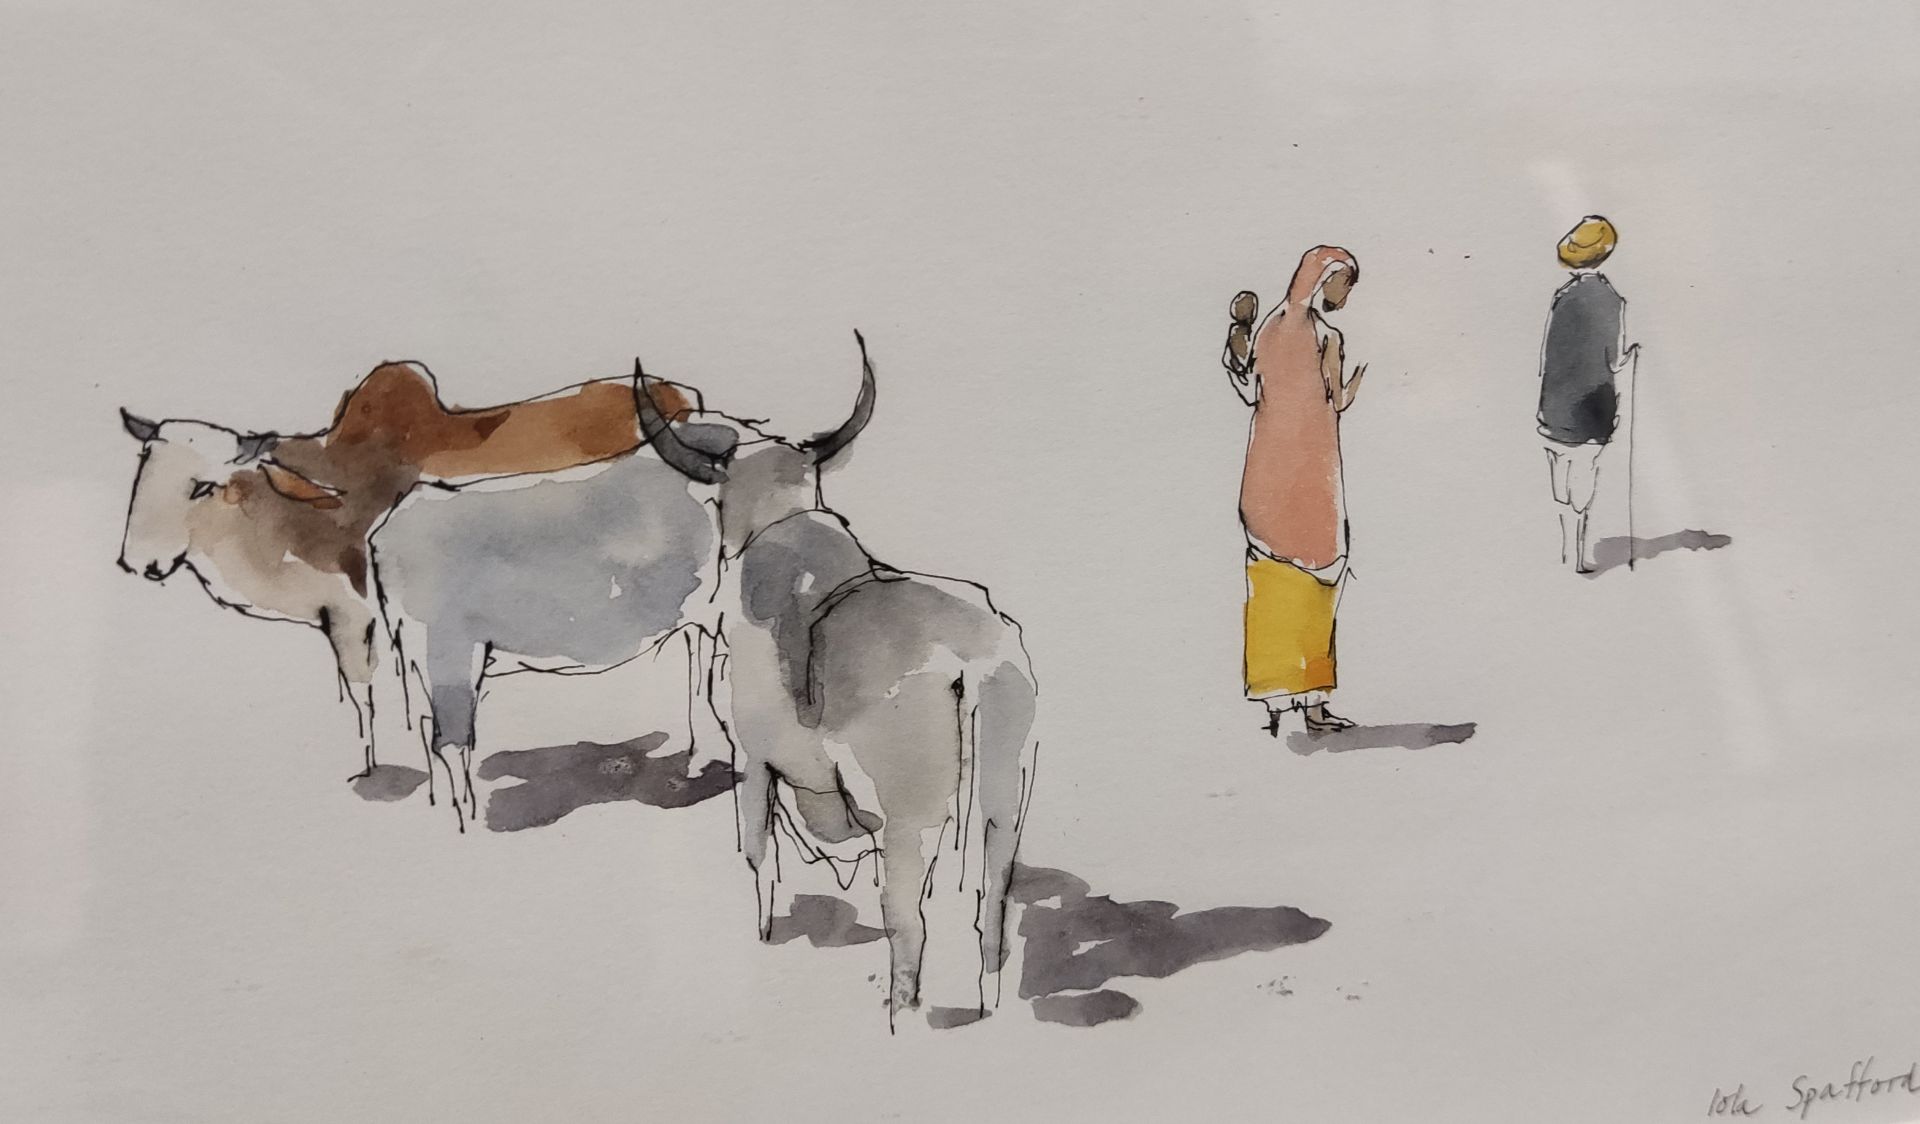 1 x Indian Cattle Watercolour by Iola Spafford - Ref: CNT434 - CL845 - Location: Altrincham WA14 - Image 2 of 9